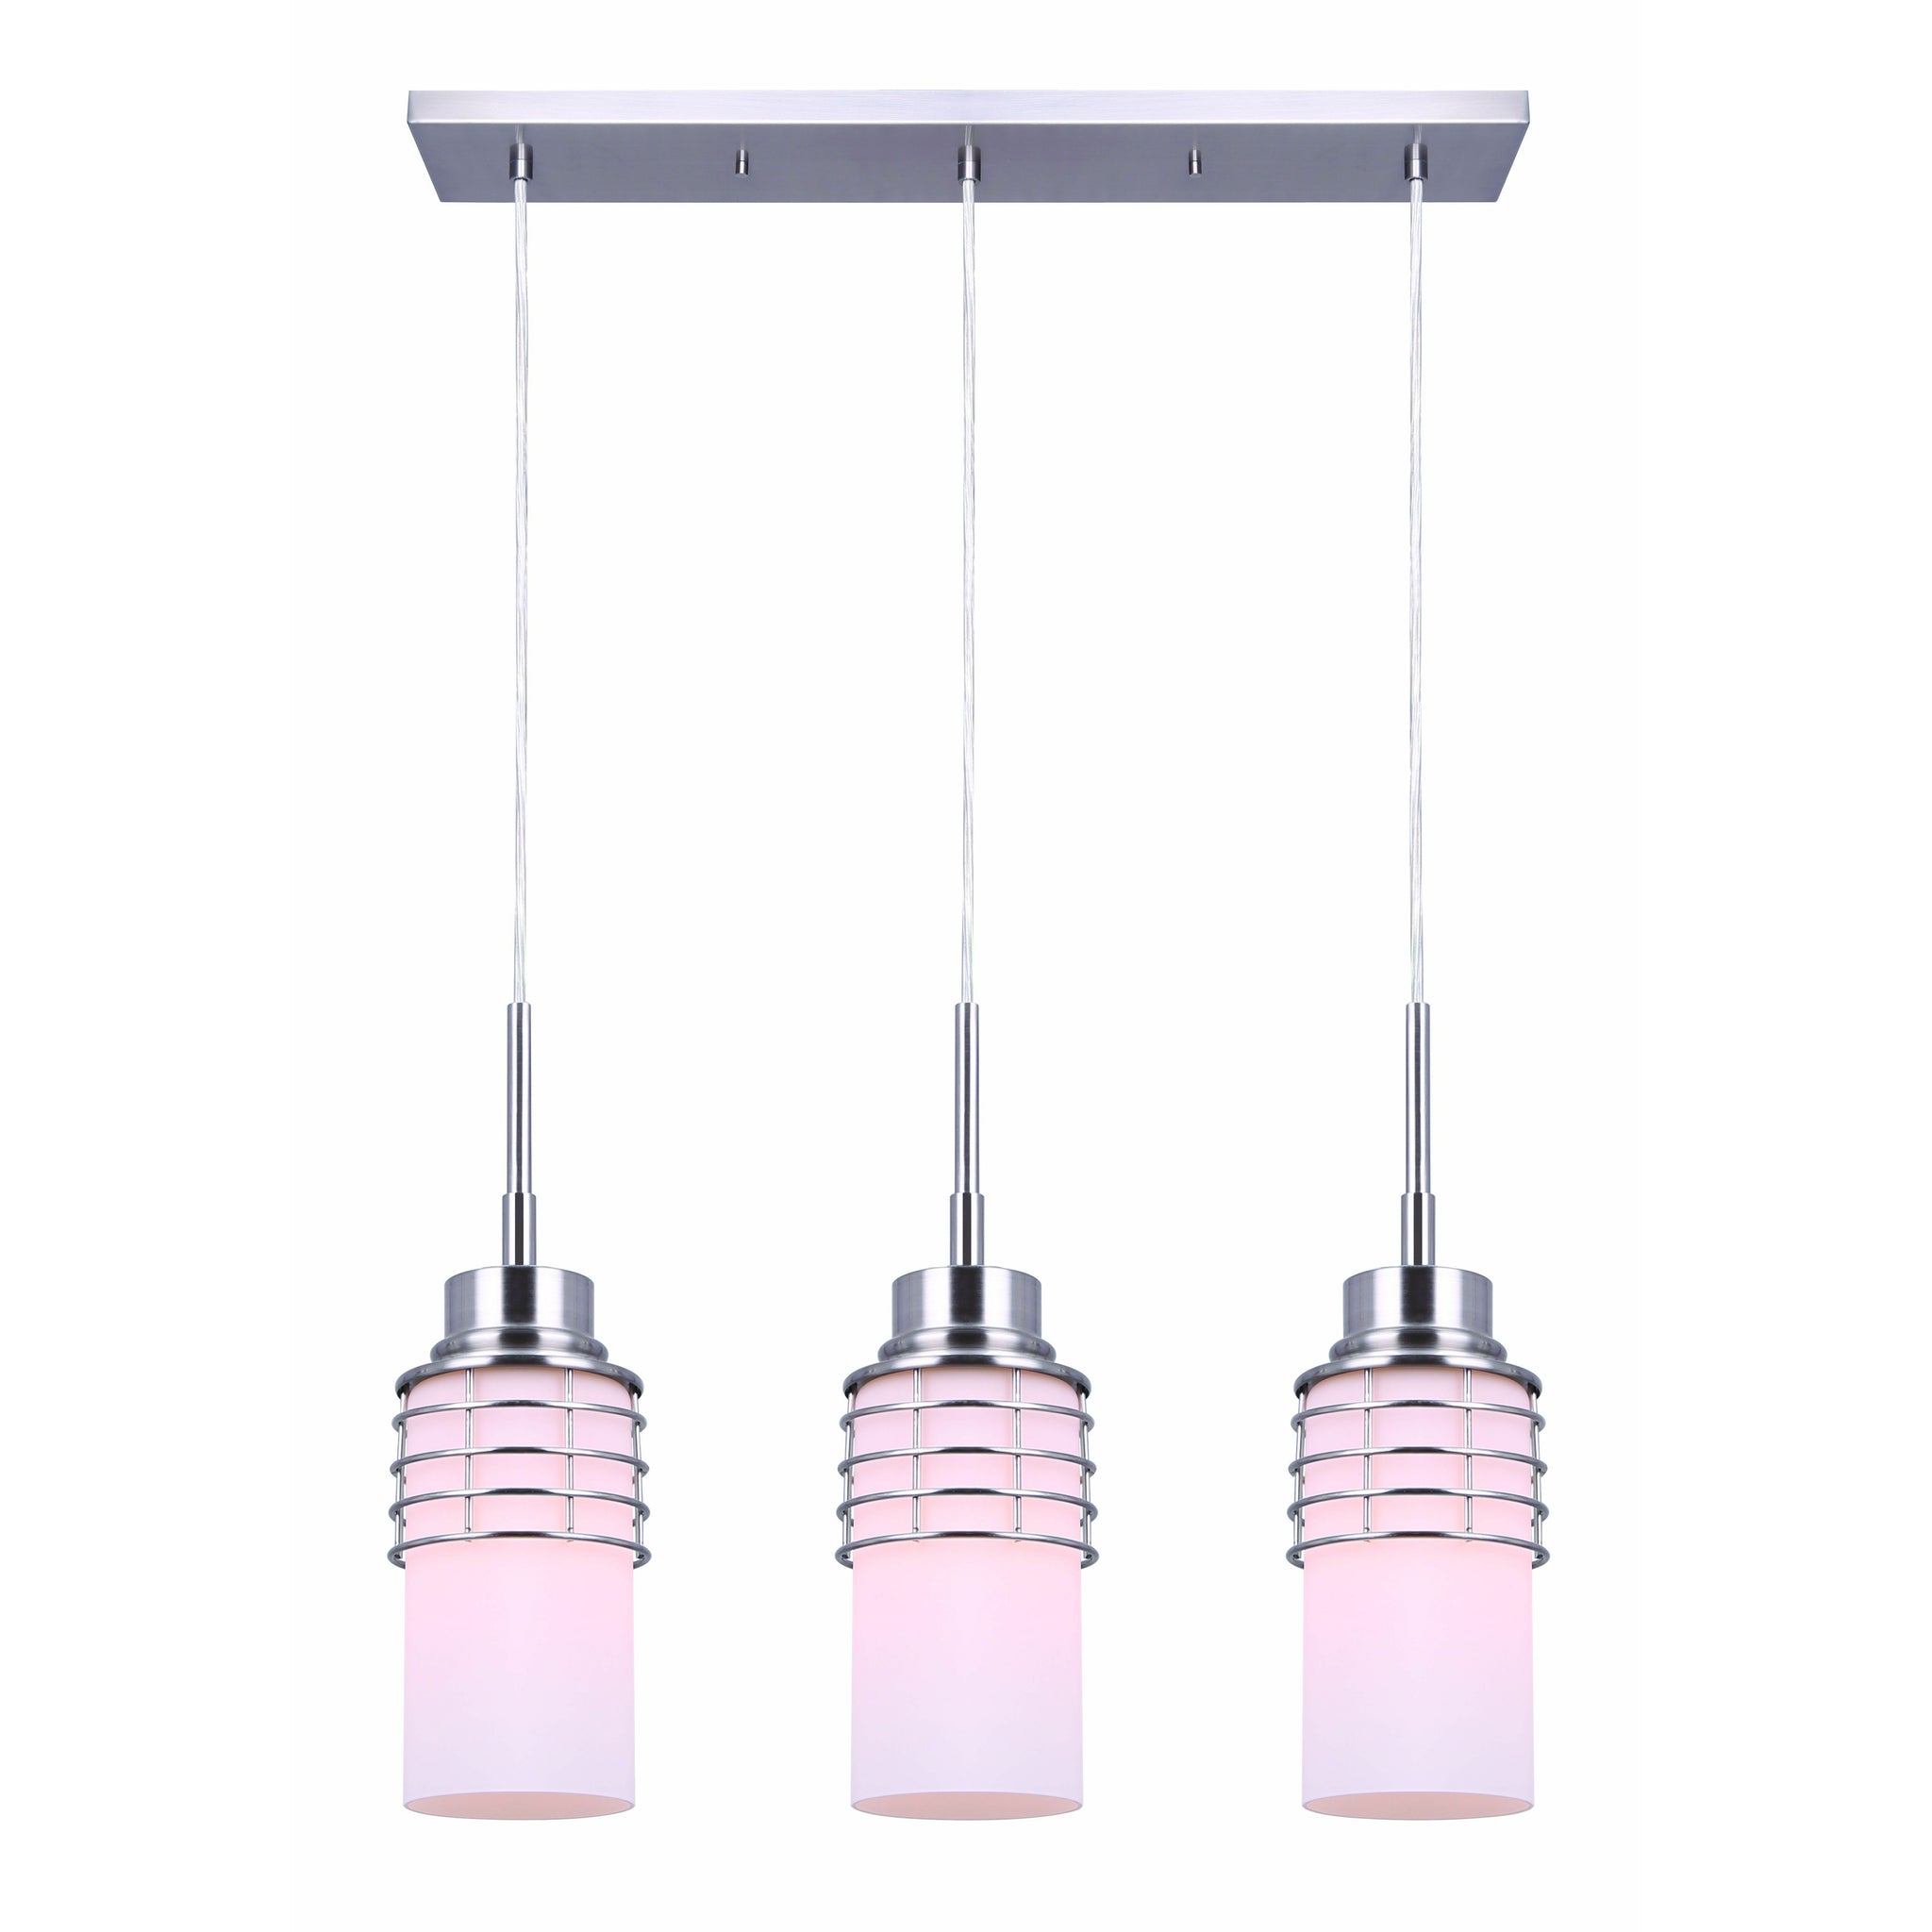 Ashby Linear Suspension Brushed Nickel